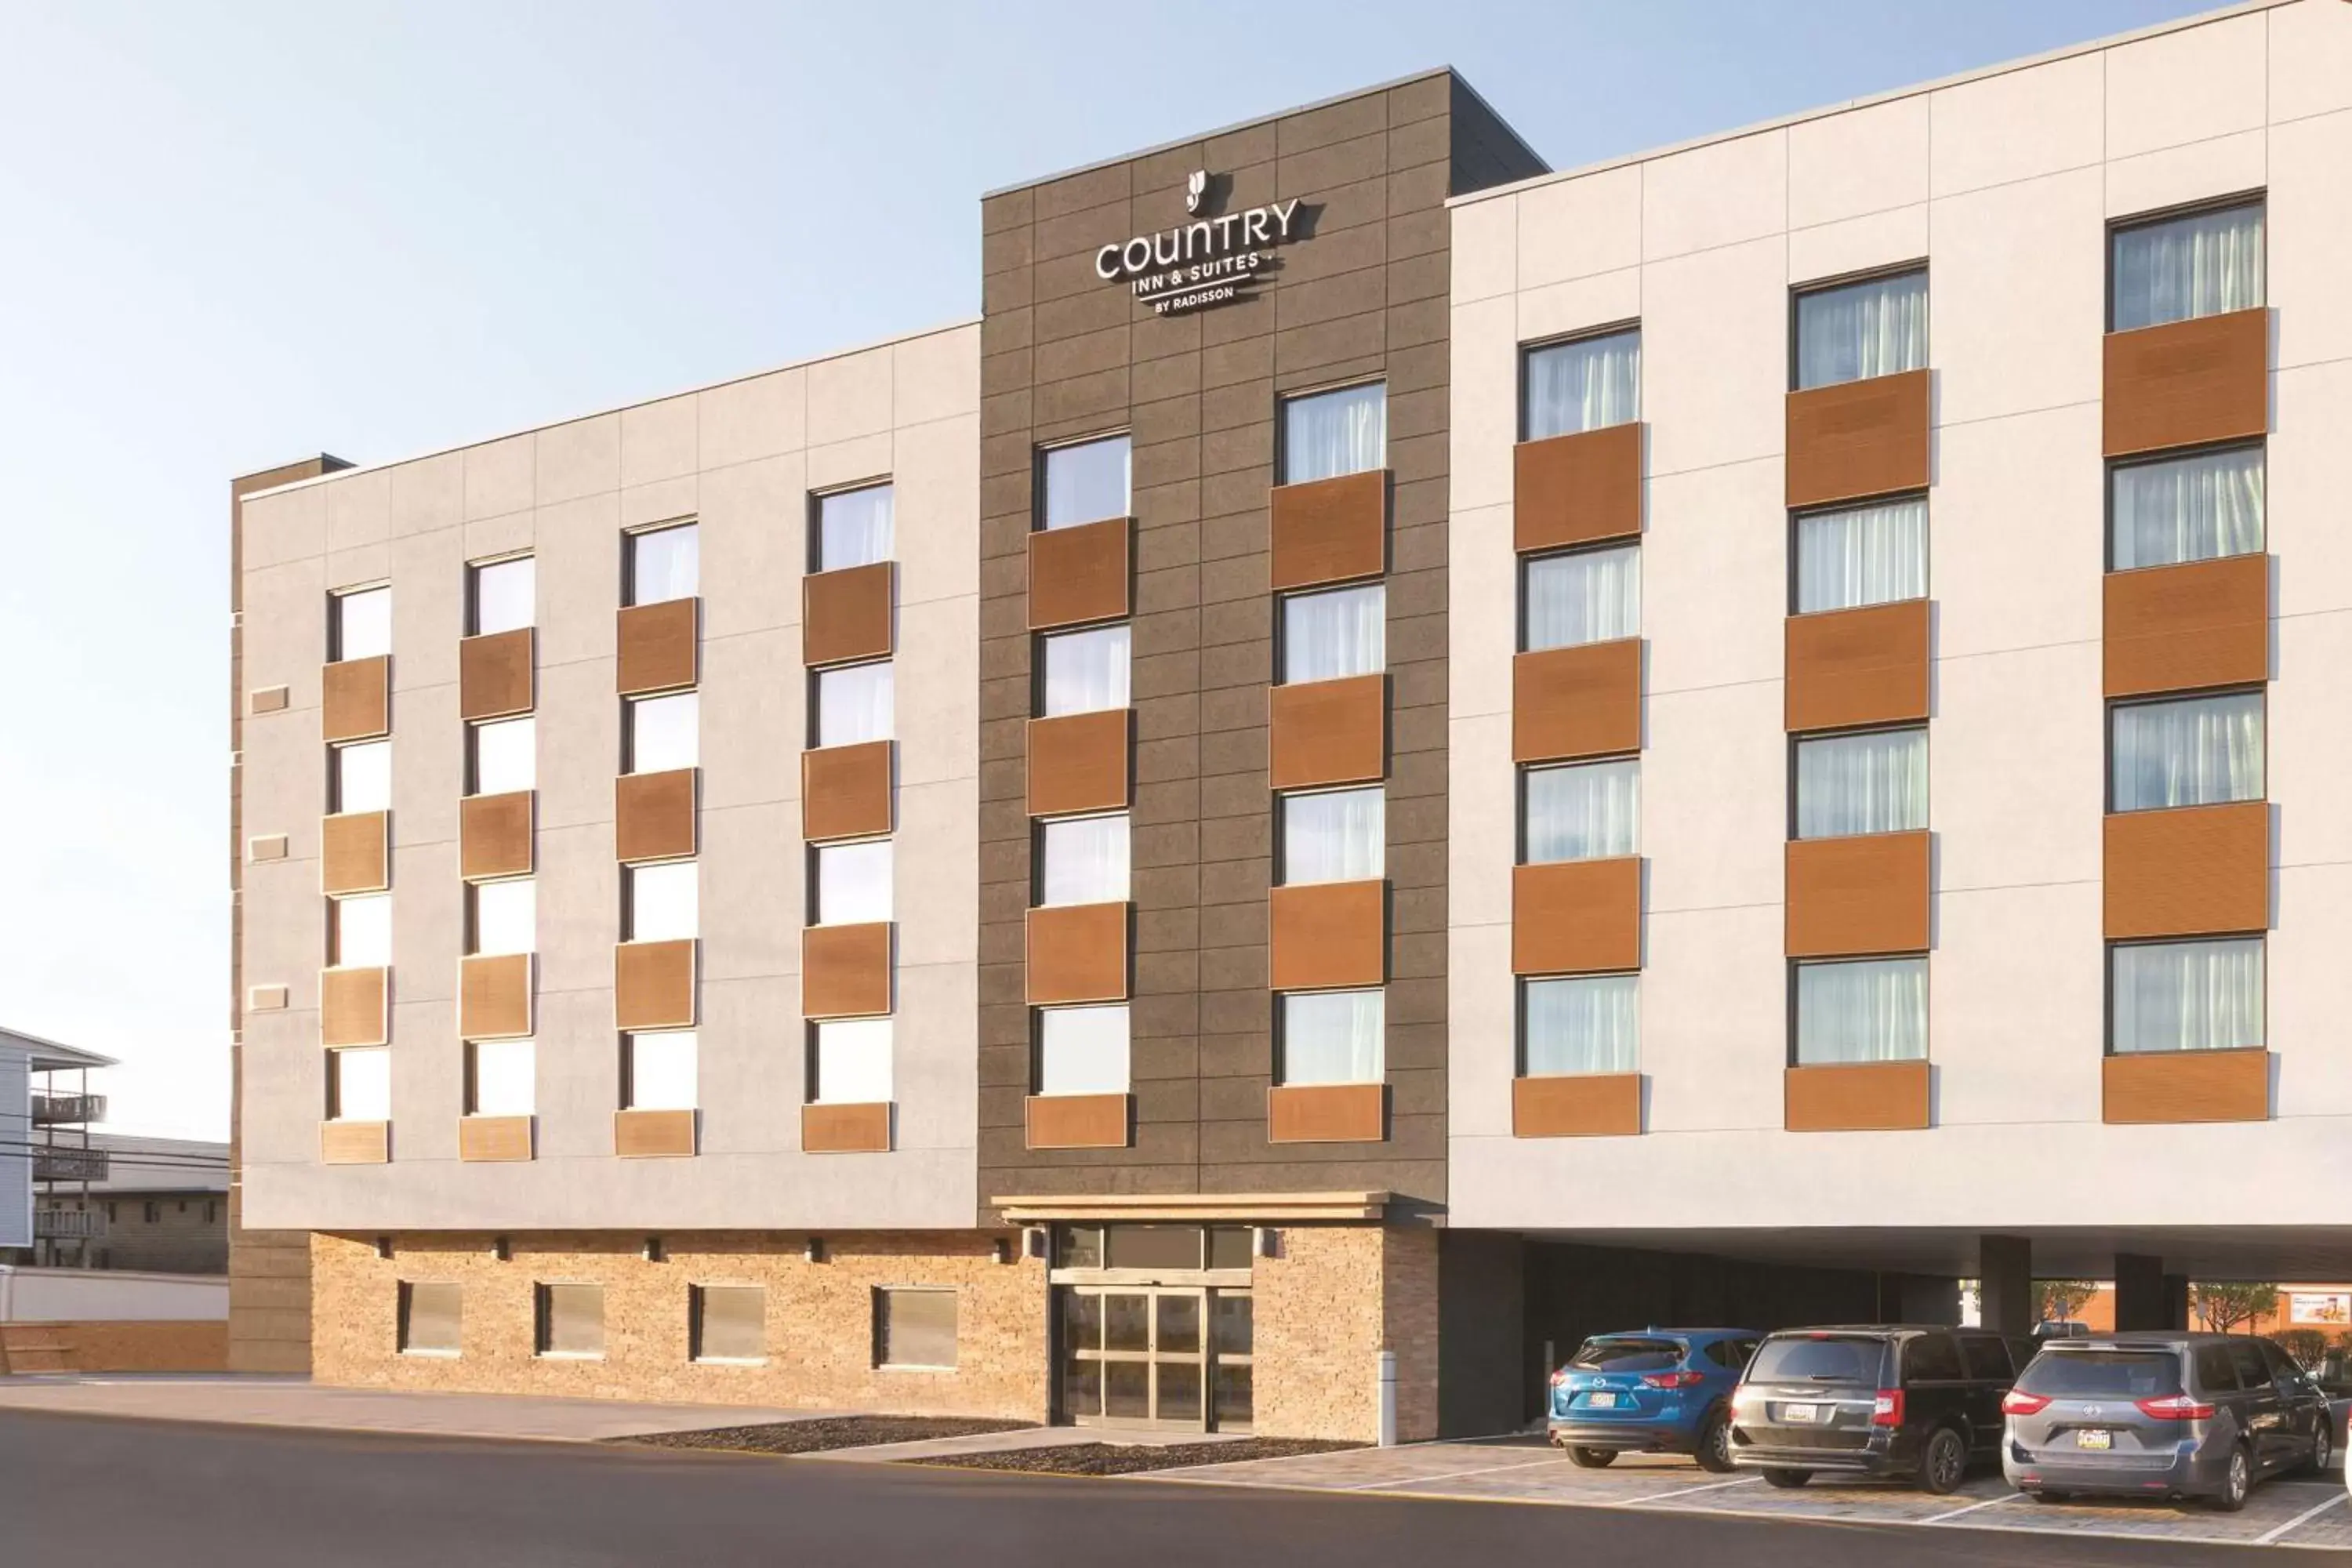 Property building in Country Inn & Suites by Radisson Ocean City